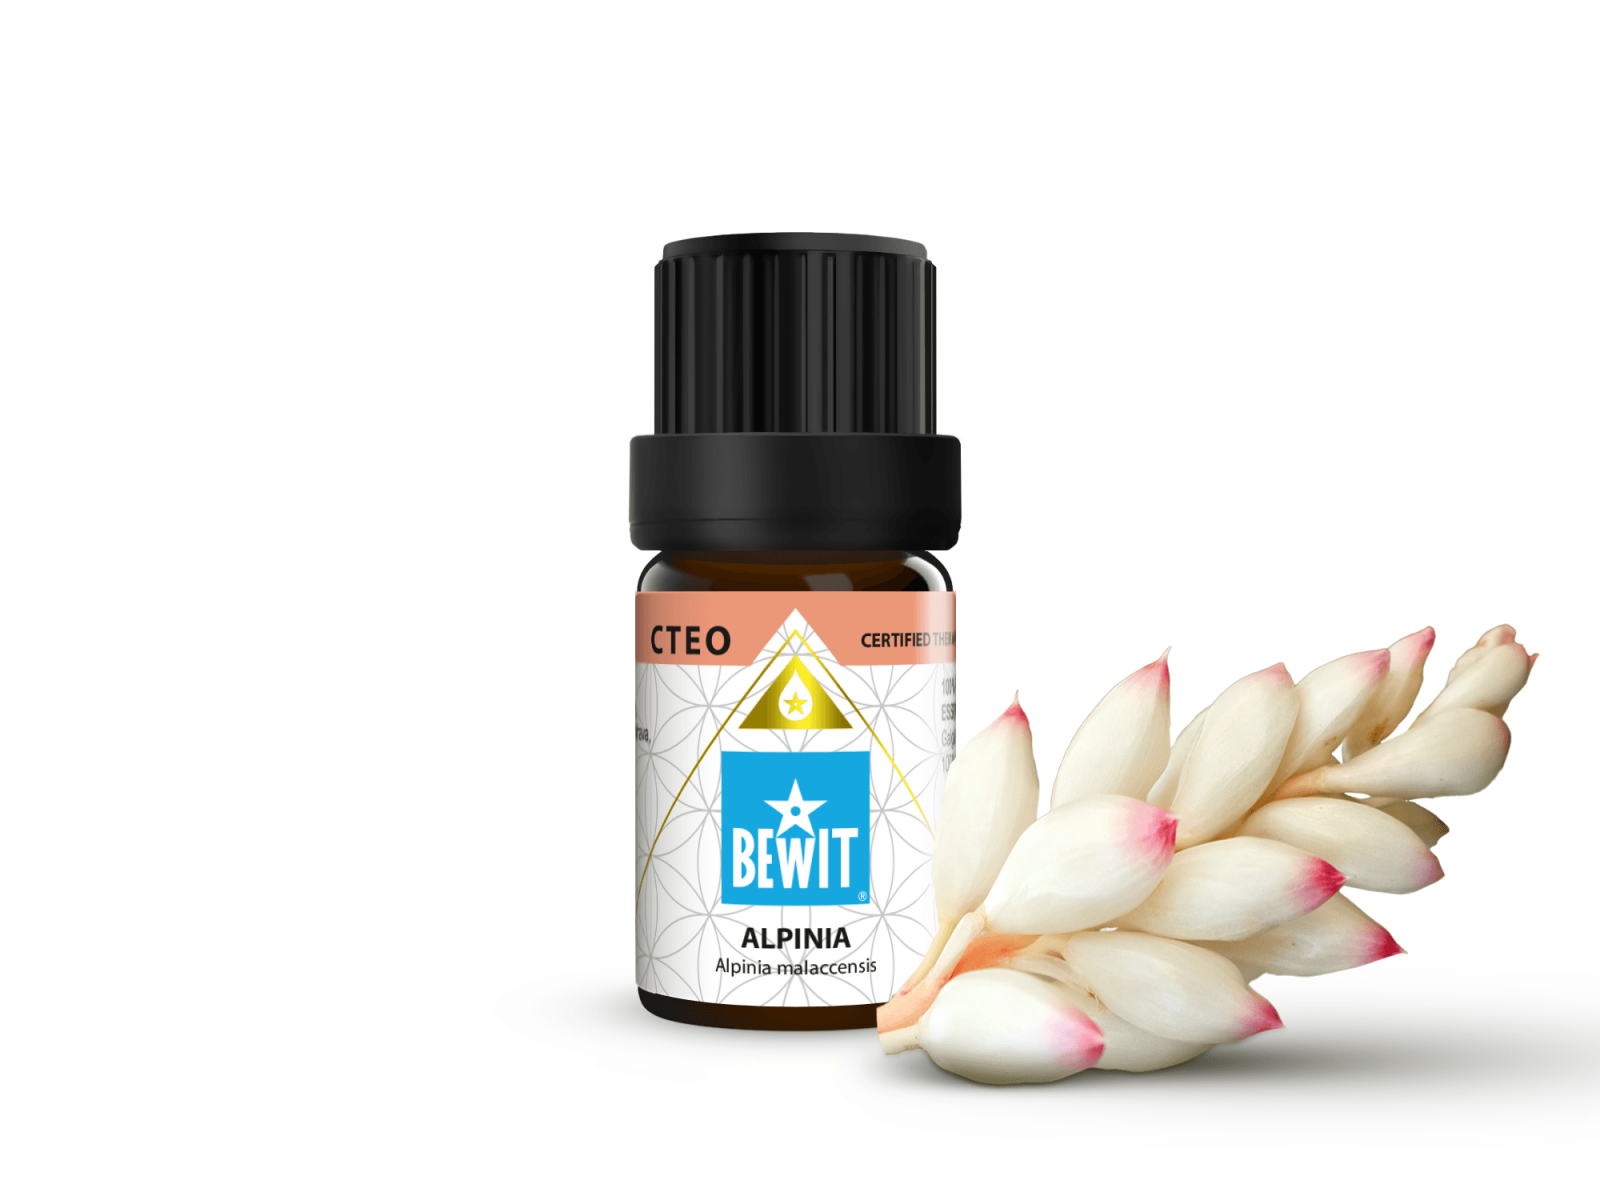 BEWIT Alpinia - 100% pure and natural CTEO® essential oil - 2